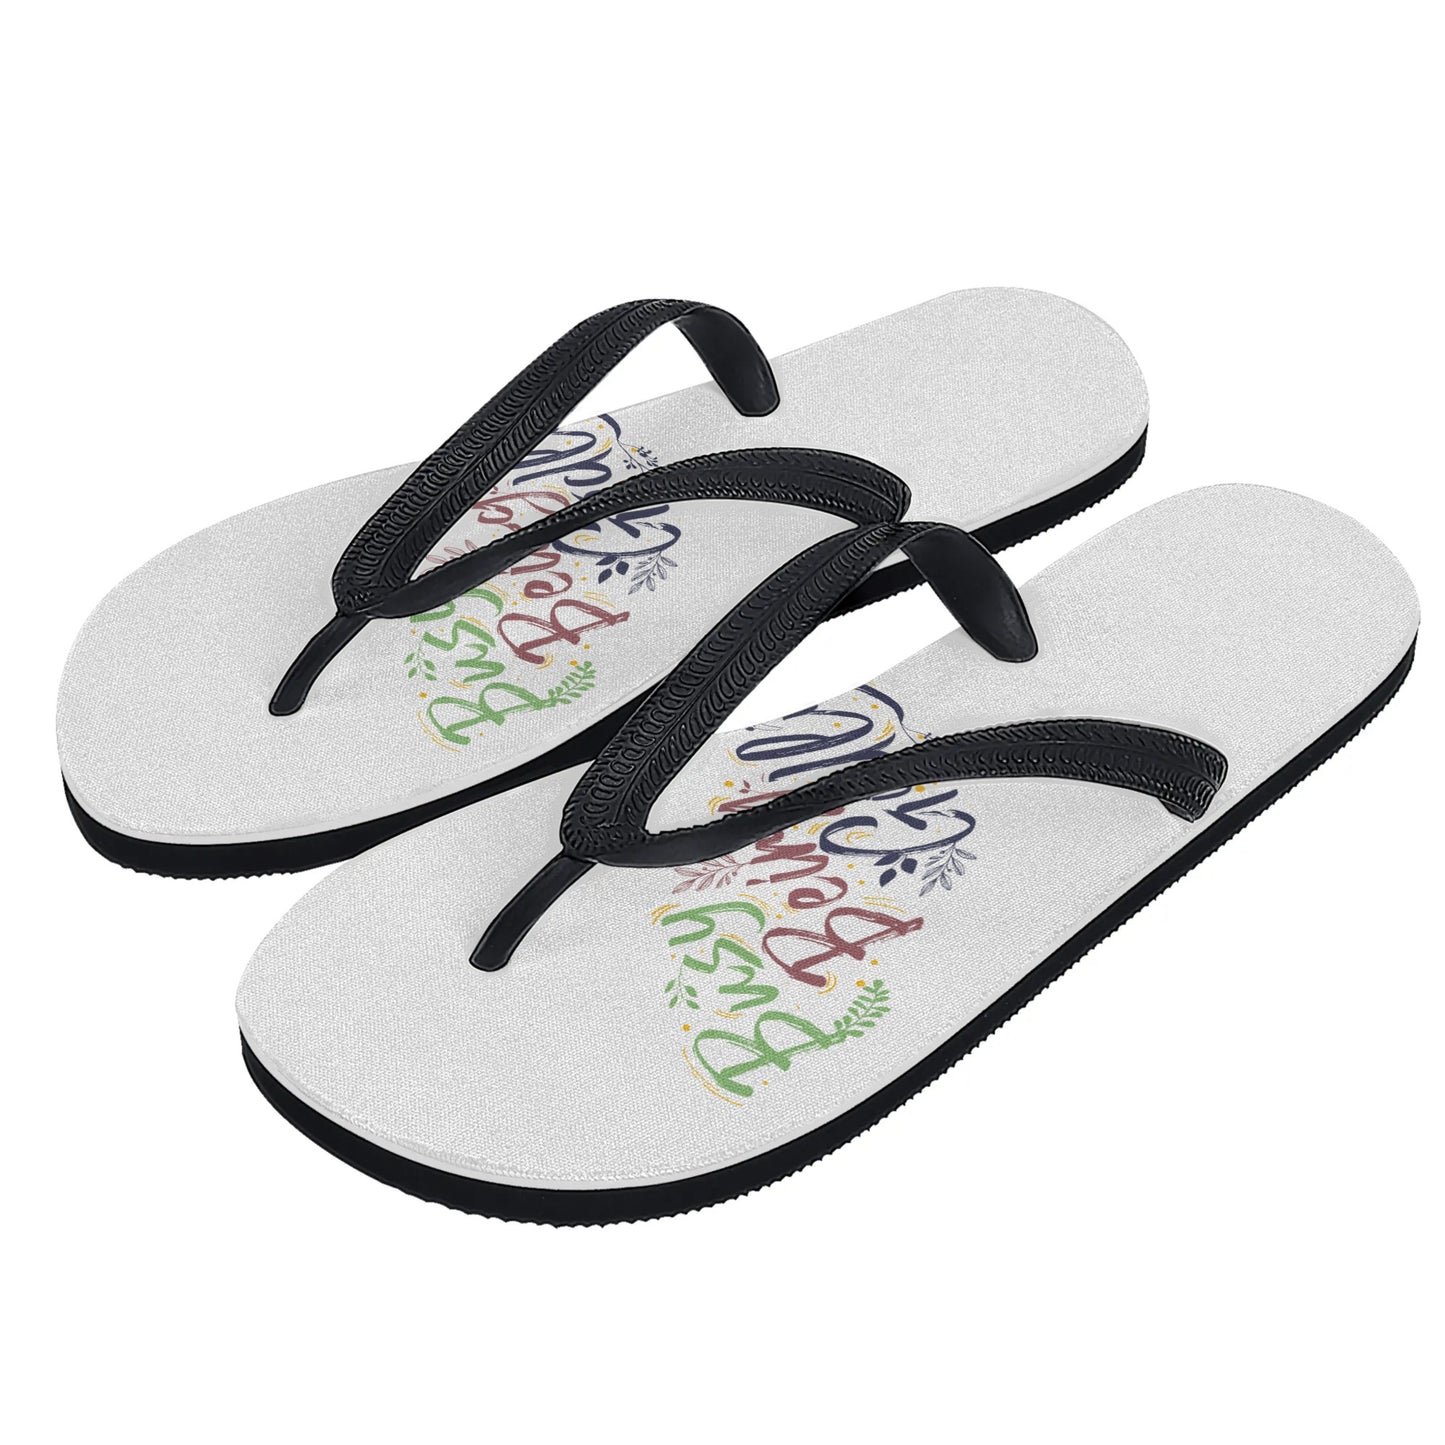 Busy Being Godly Womens Christian Flip Flops popcustoms